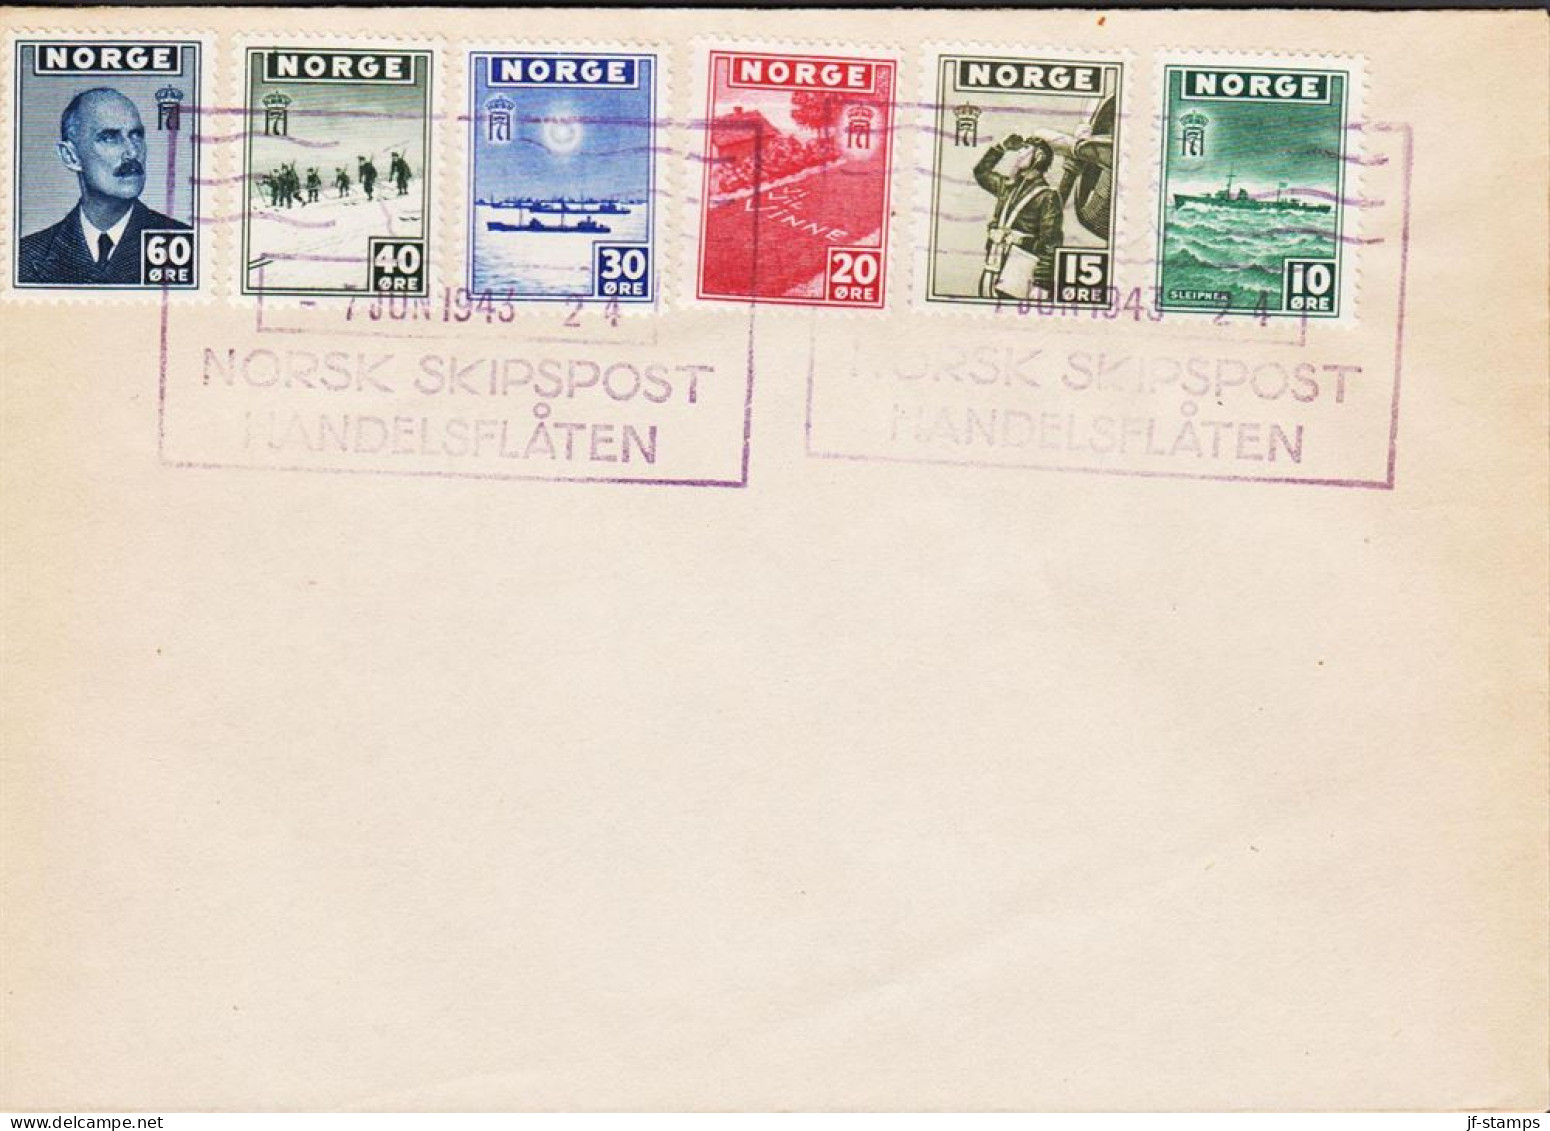 1943. NORGE. Fine Envelope With 10, 15, 20, 30 40 And 60 ØRE London Issue Cancelled With ... (Michel 278-283) - JF545678 - Lettres & Documents